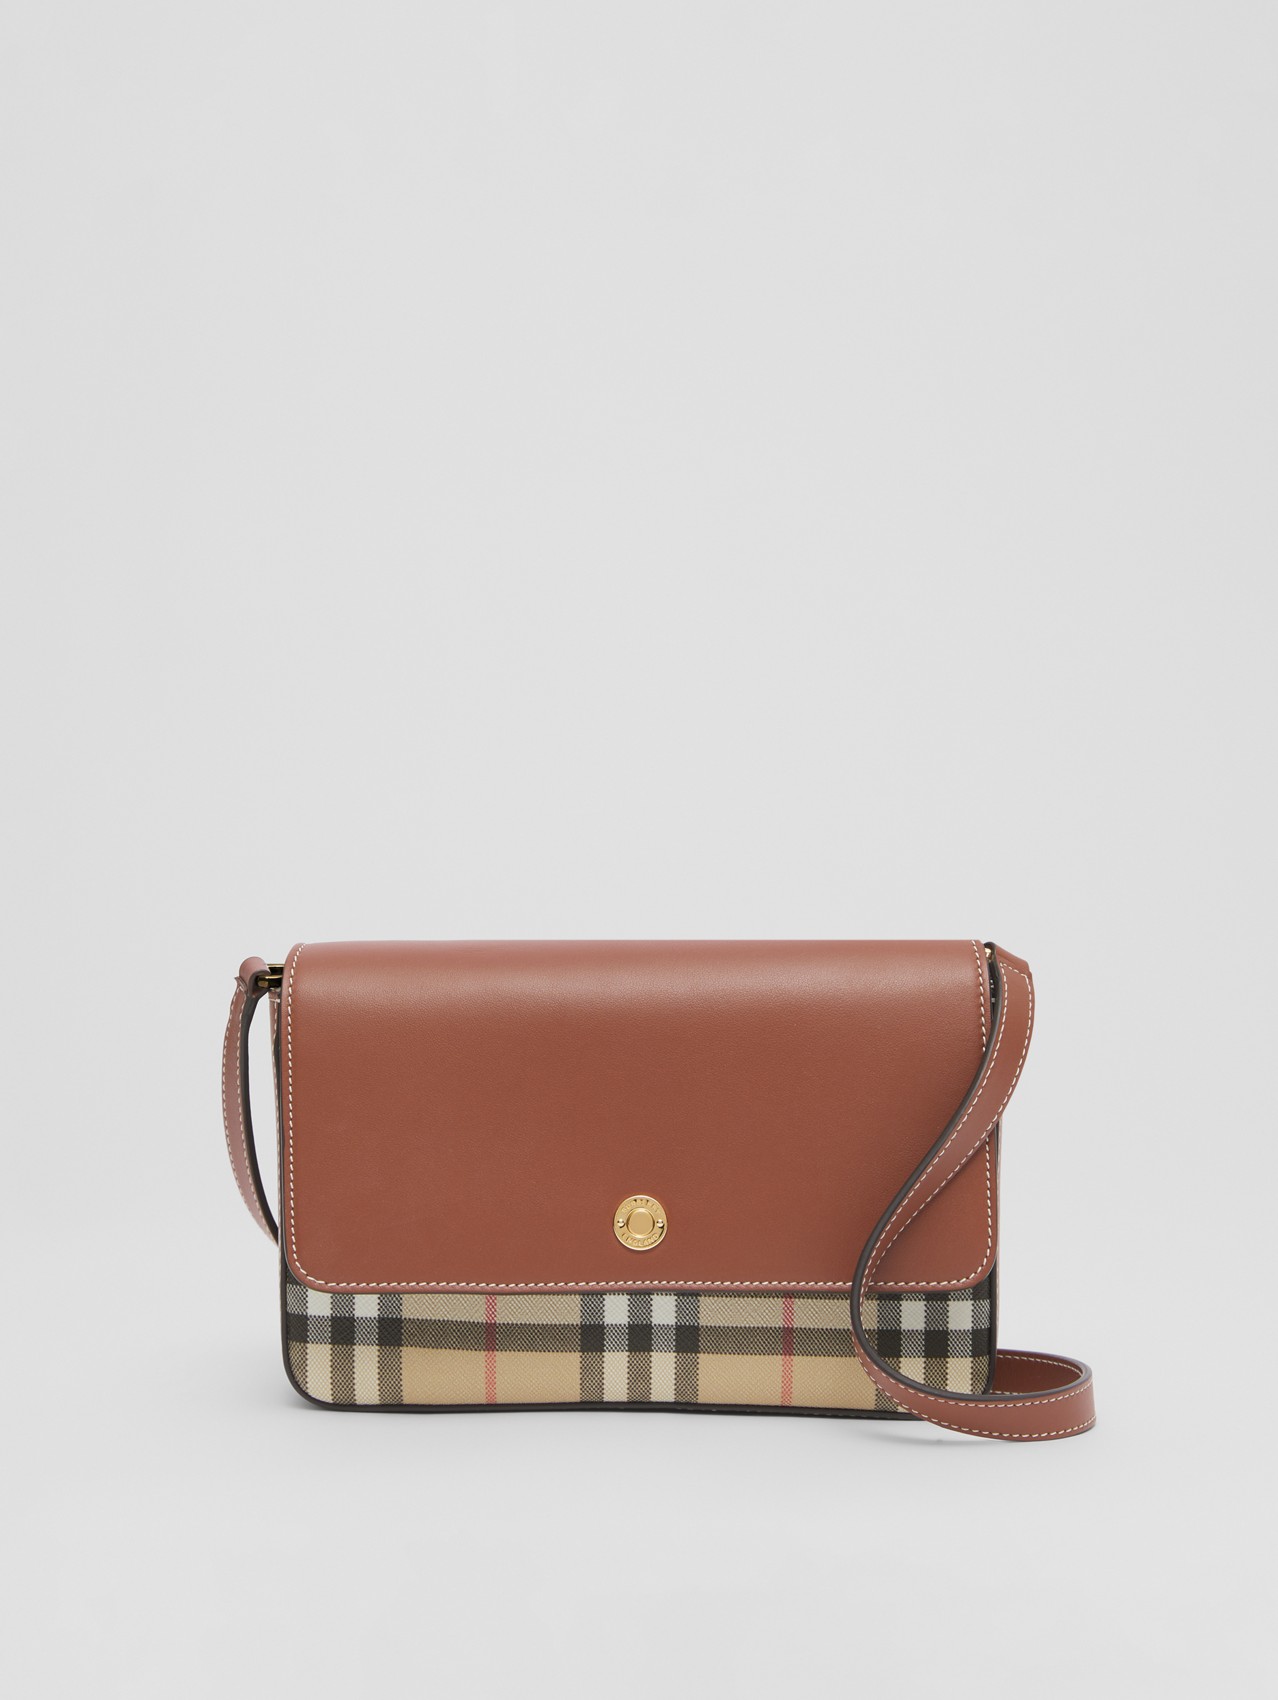 Bio-based Vintage Check and Leather Penny Bag in Archive Beige/tan